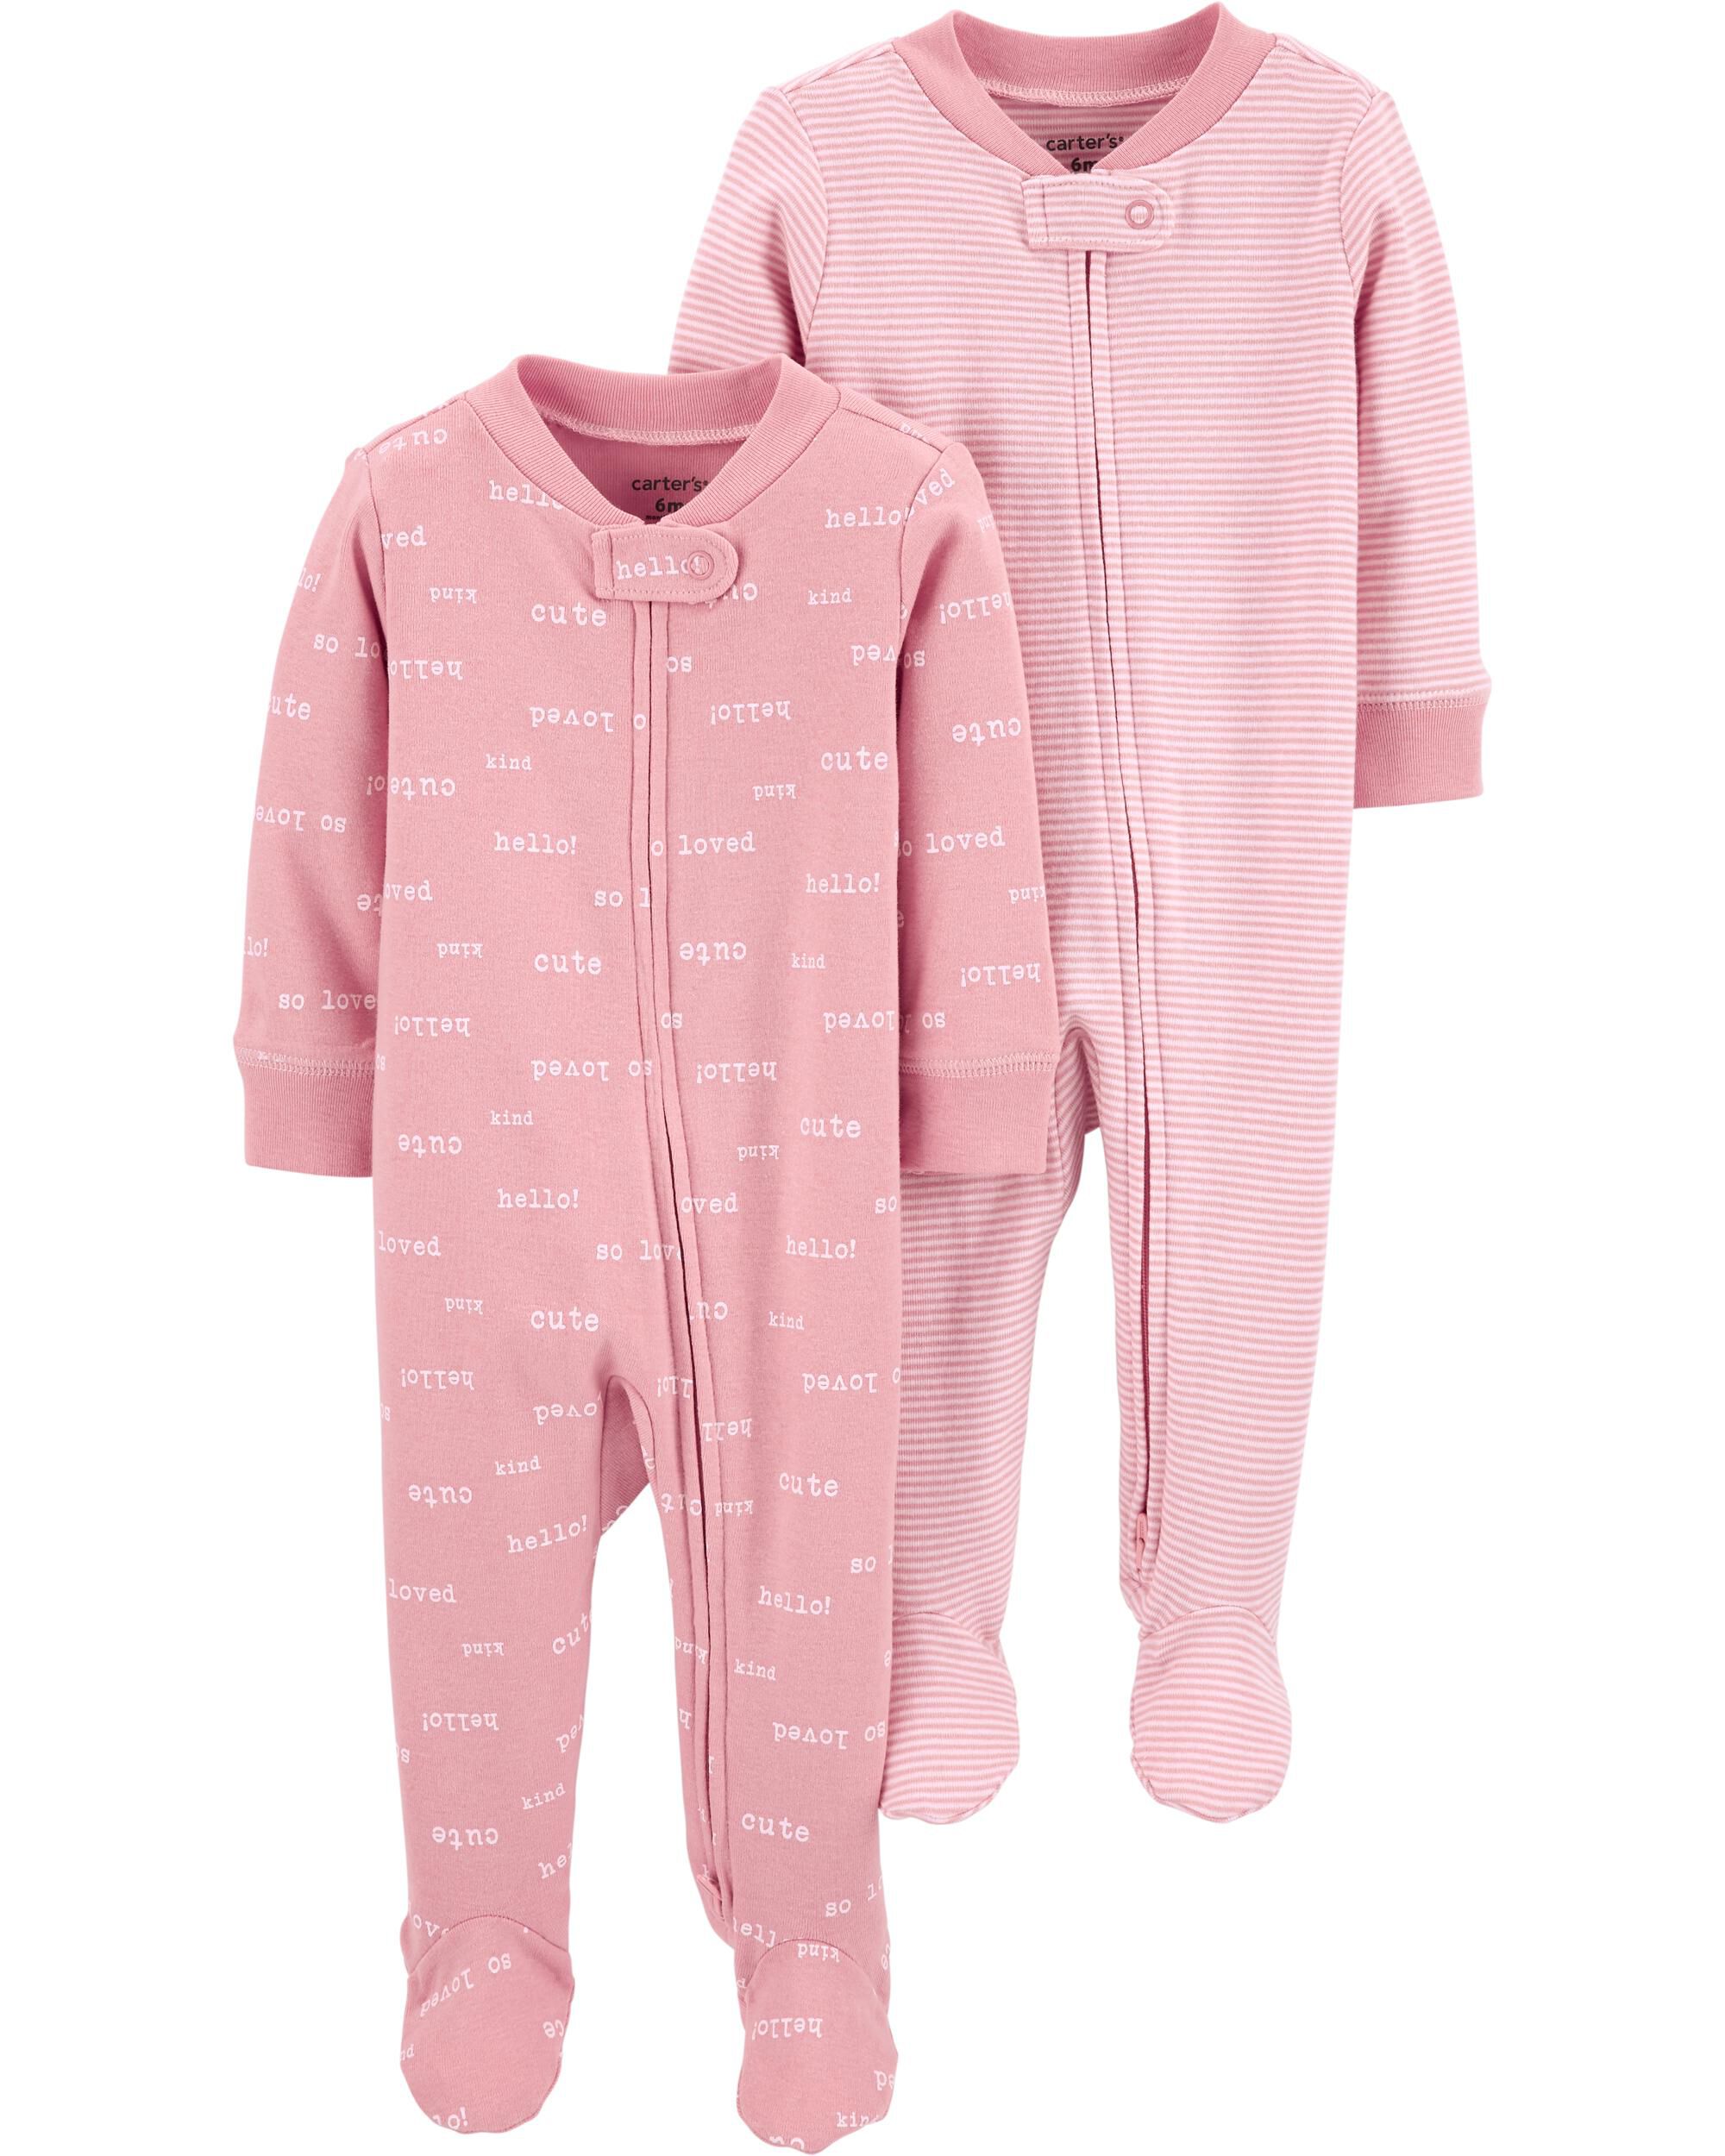  *CLEARANCE* 2-Pack Cotton Zip-Up Sleep & Plays 